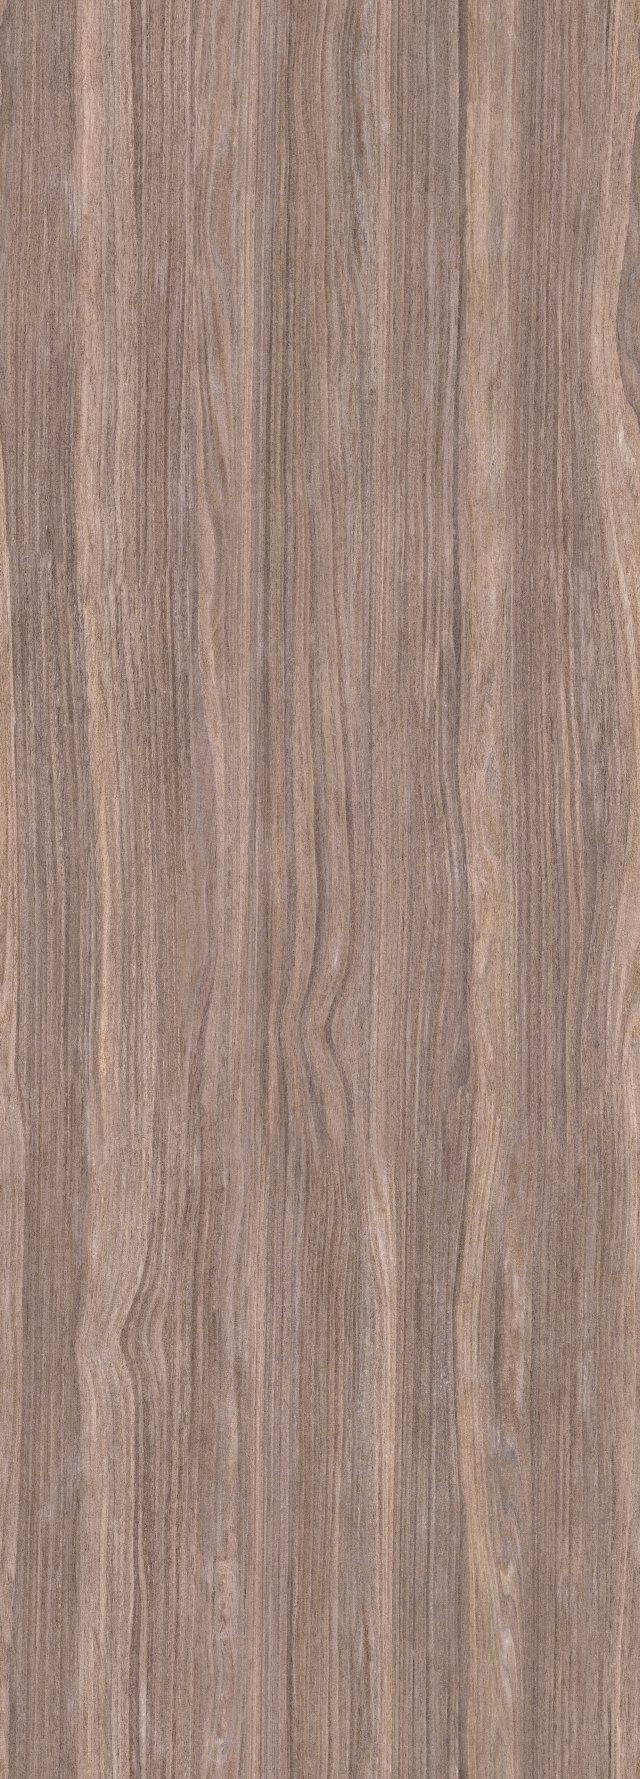 27 high resolution 3k architectural fine wood seamless textures CG